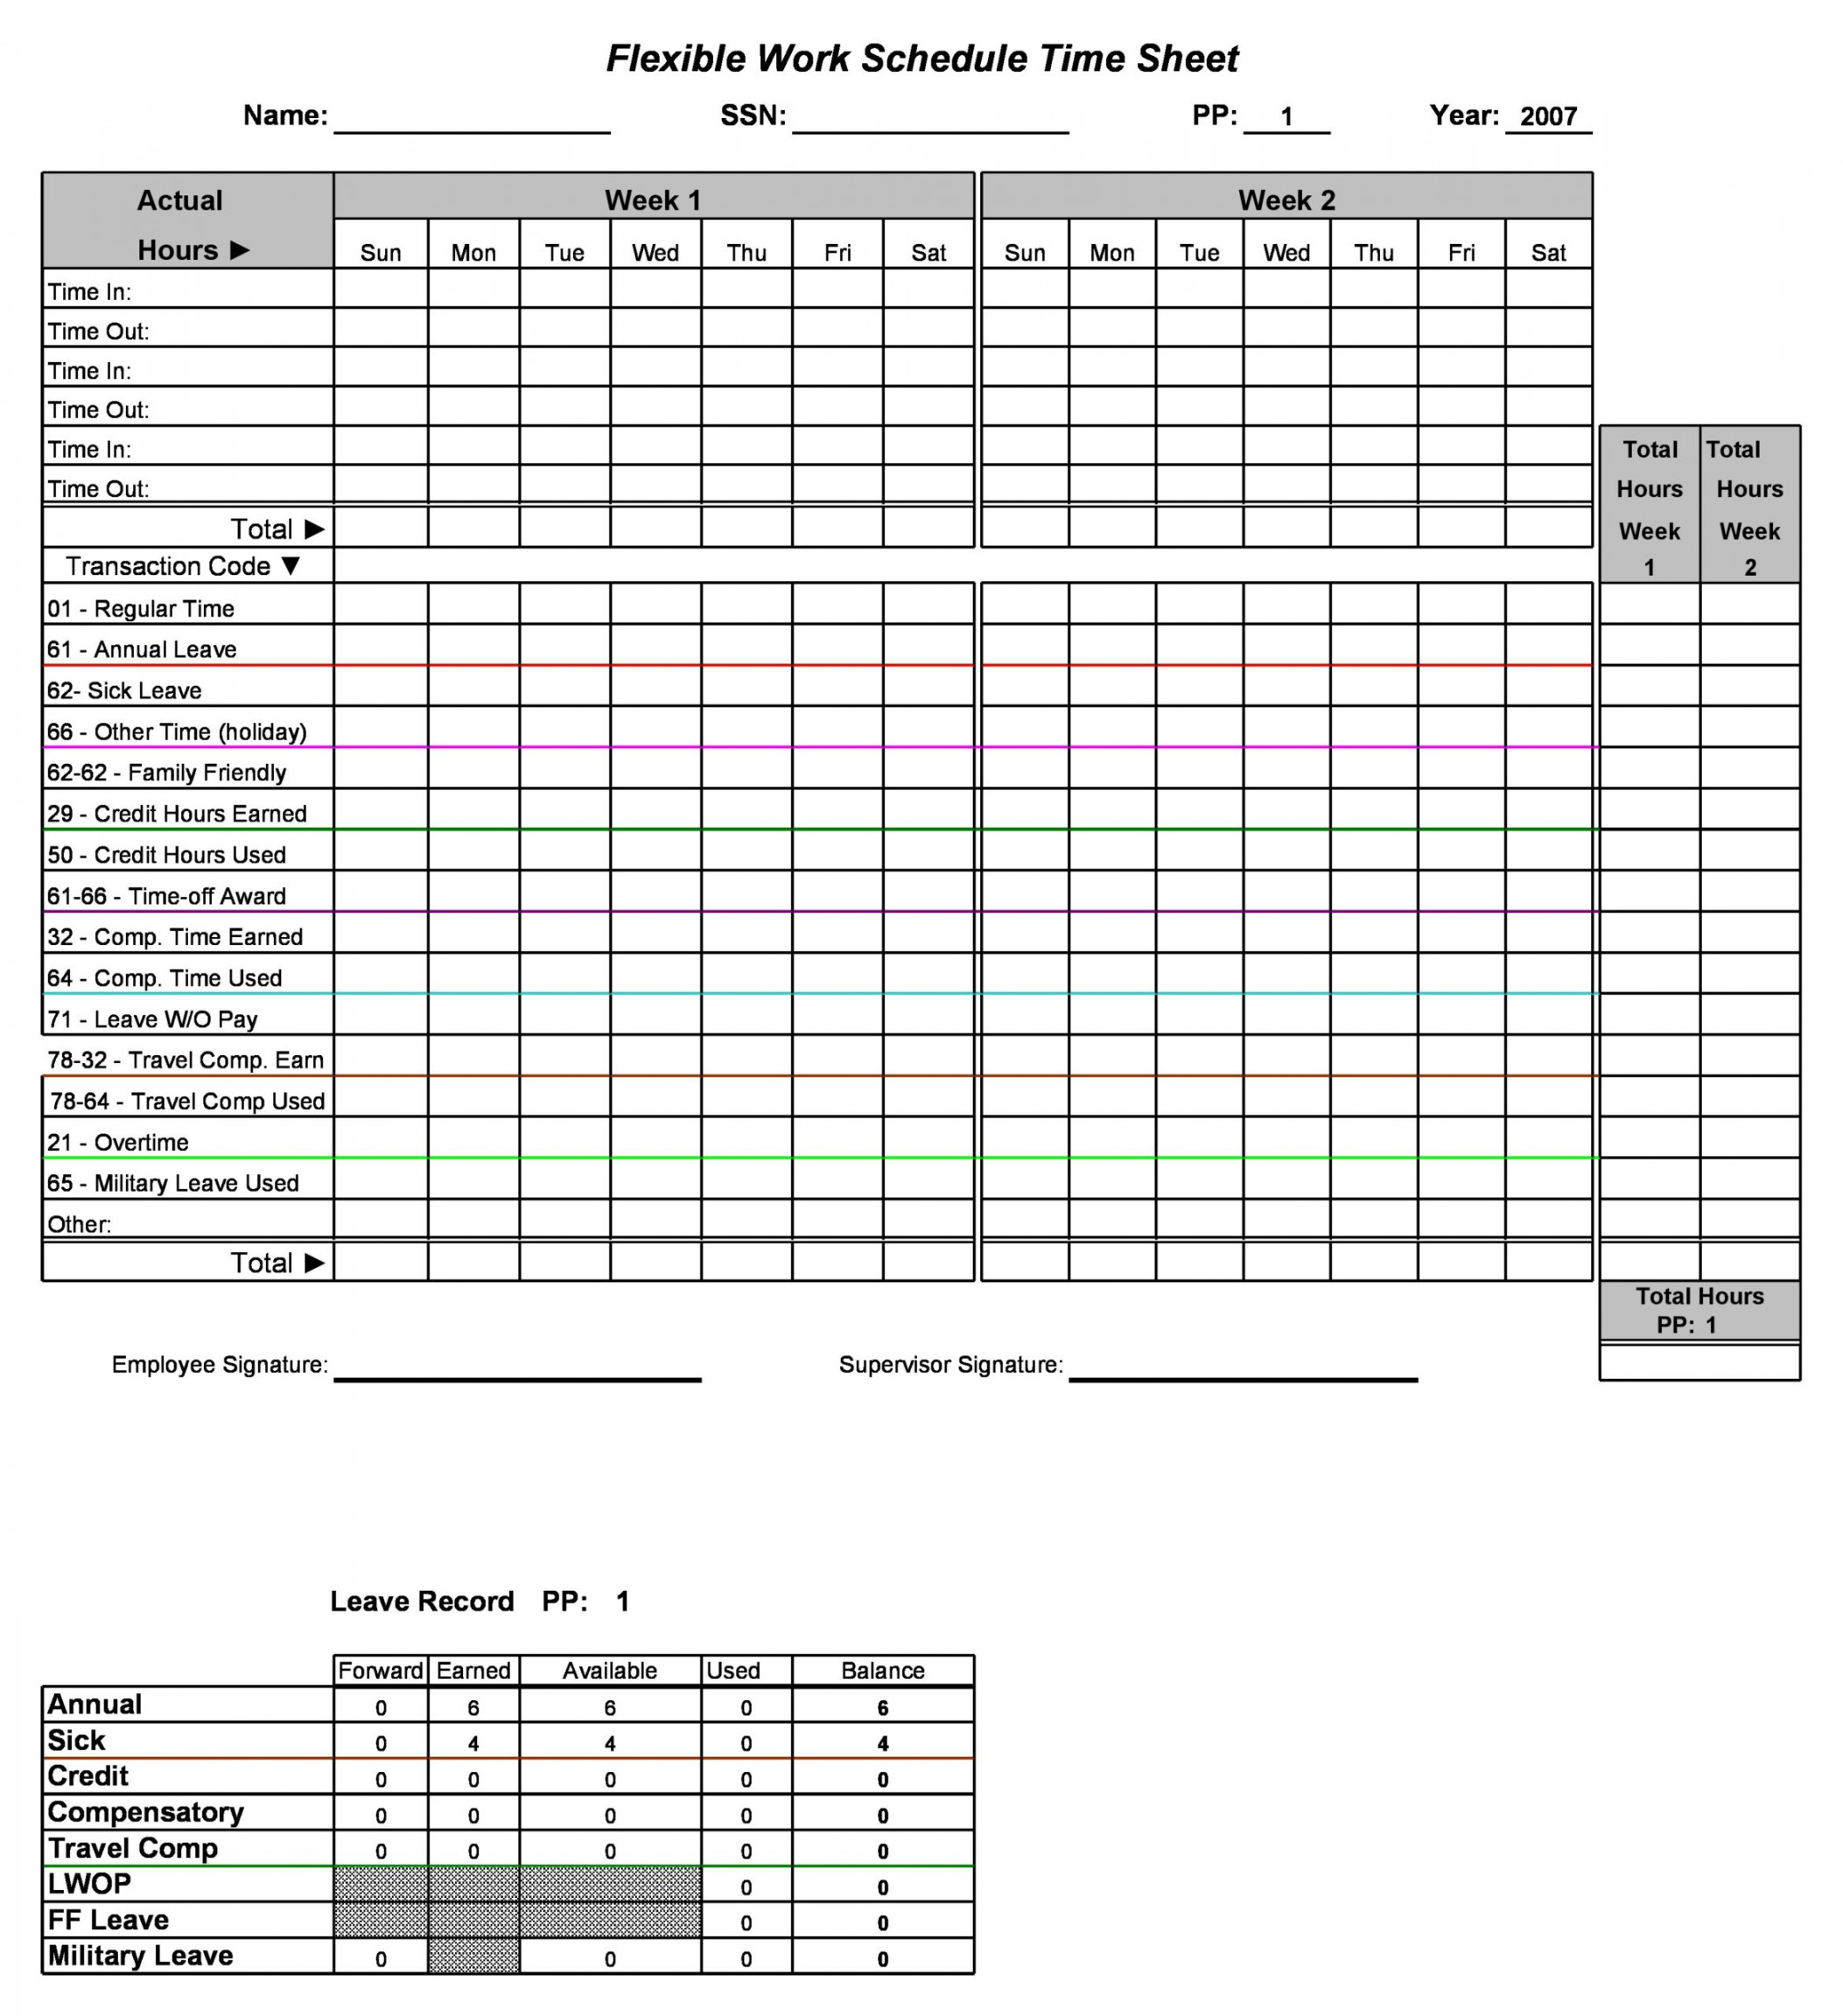 Free Employee Schedule Templates (Excel, Word, PDF)